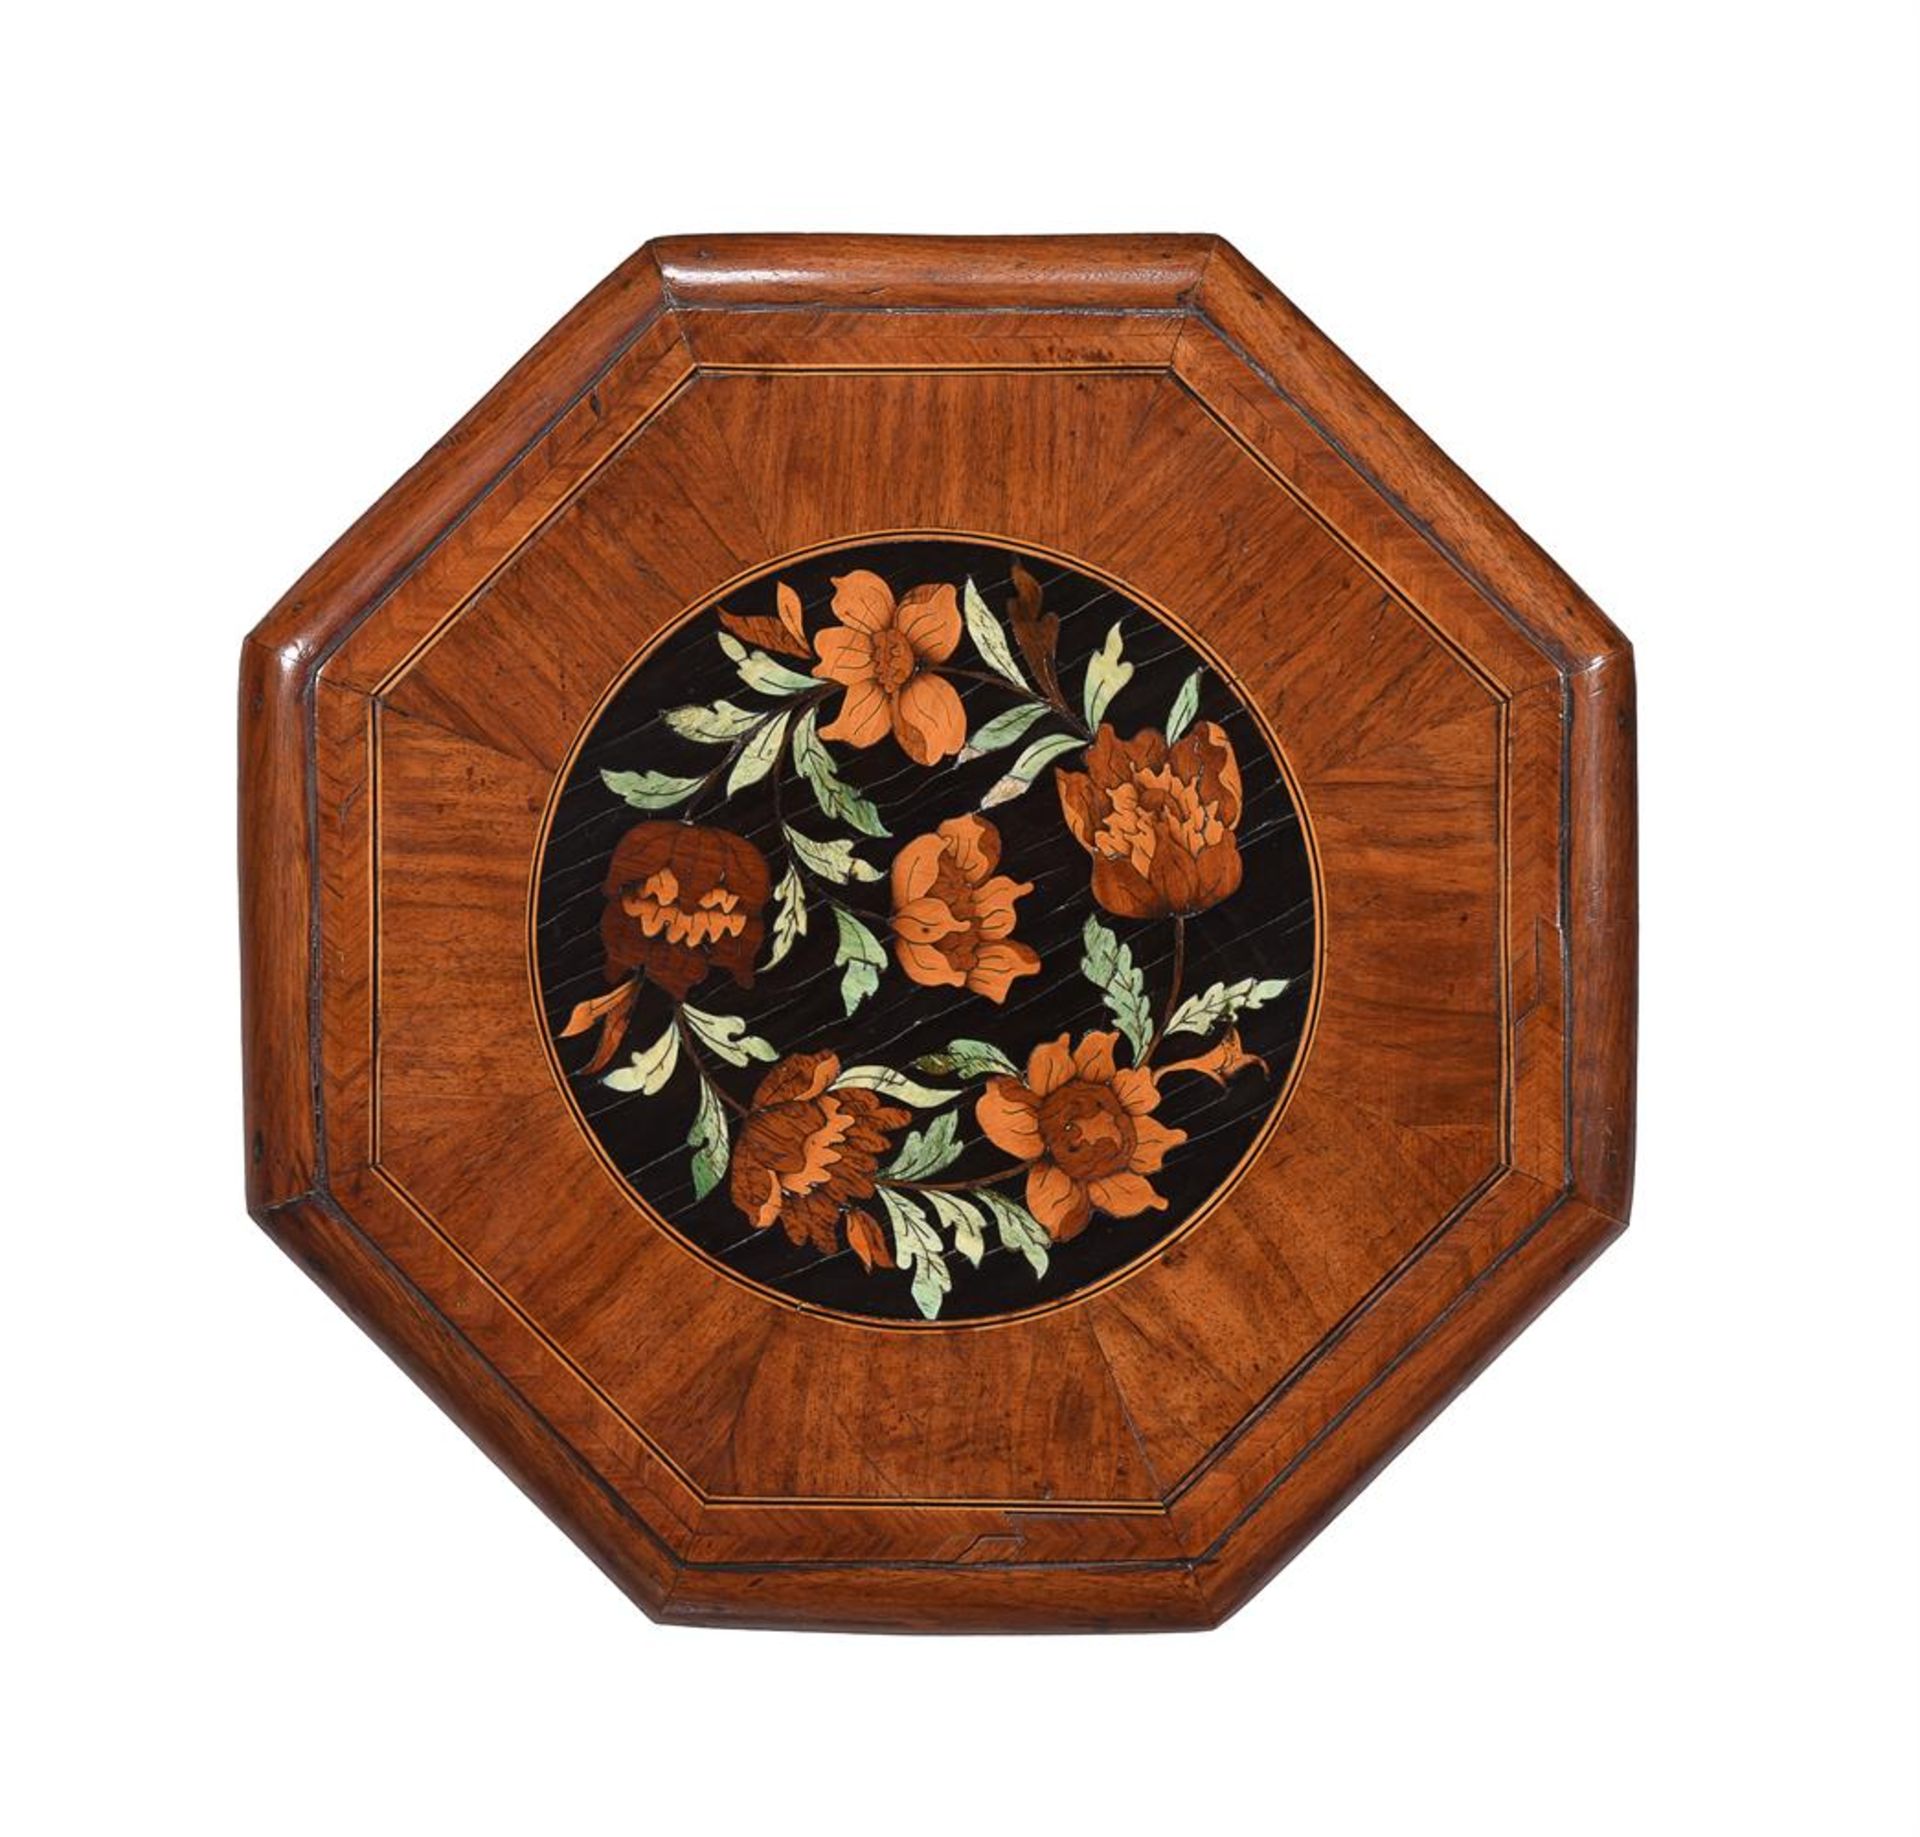 A PAIR OF WALNUT AND MARQUETRY CANDLE STANDS, 17TH CENTURY AND LATER ELEMENTS - Image 2 of 4